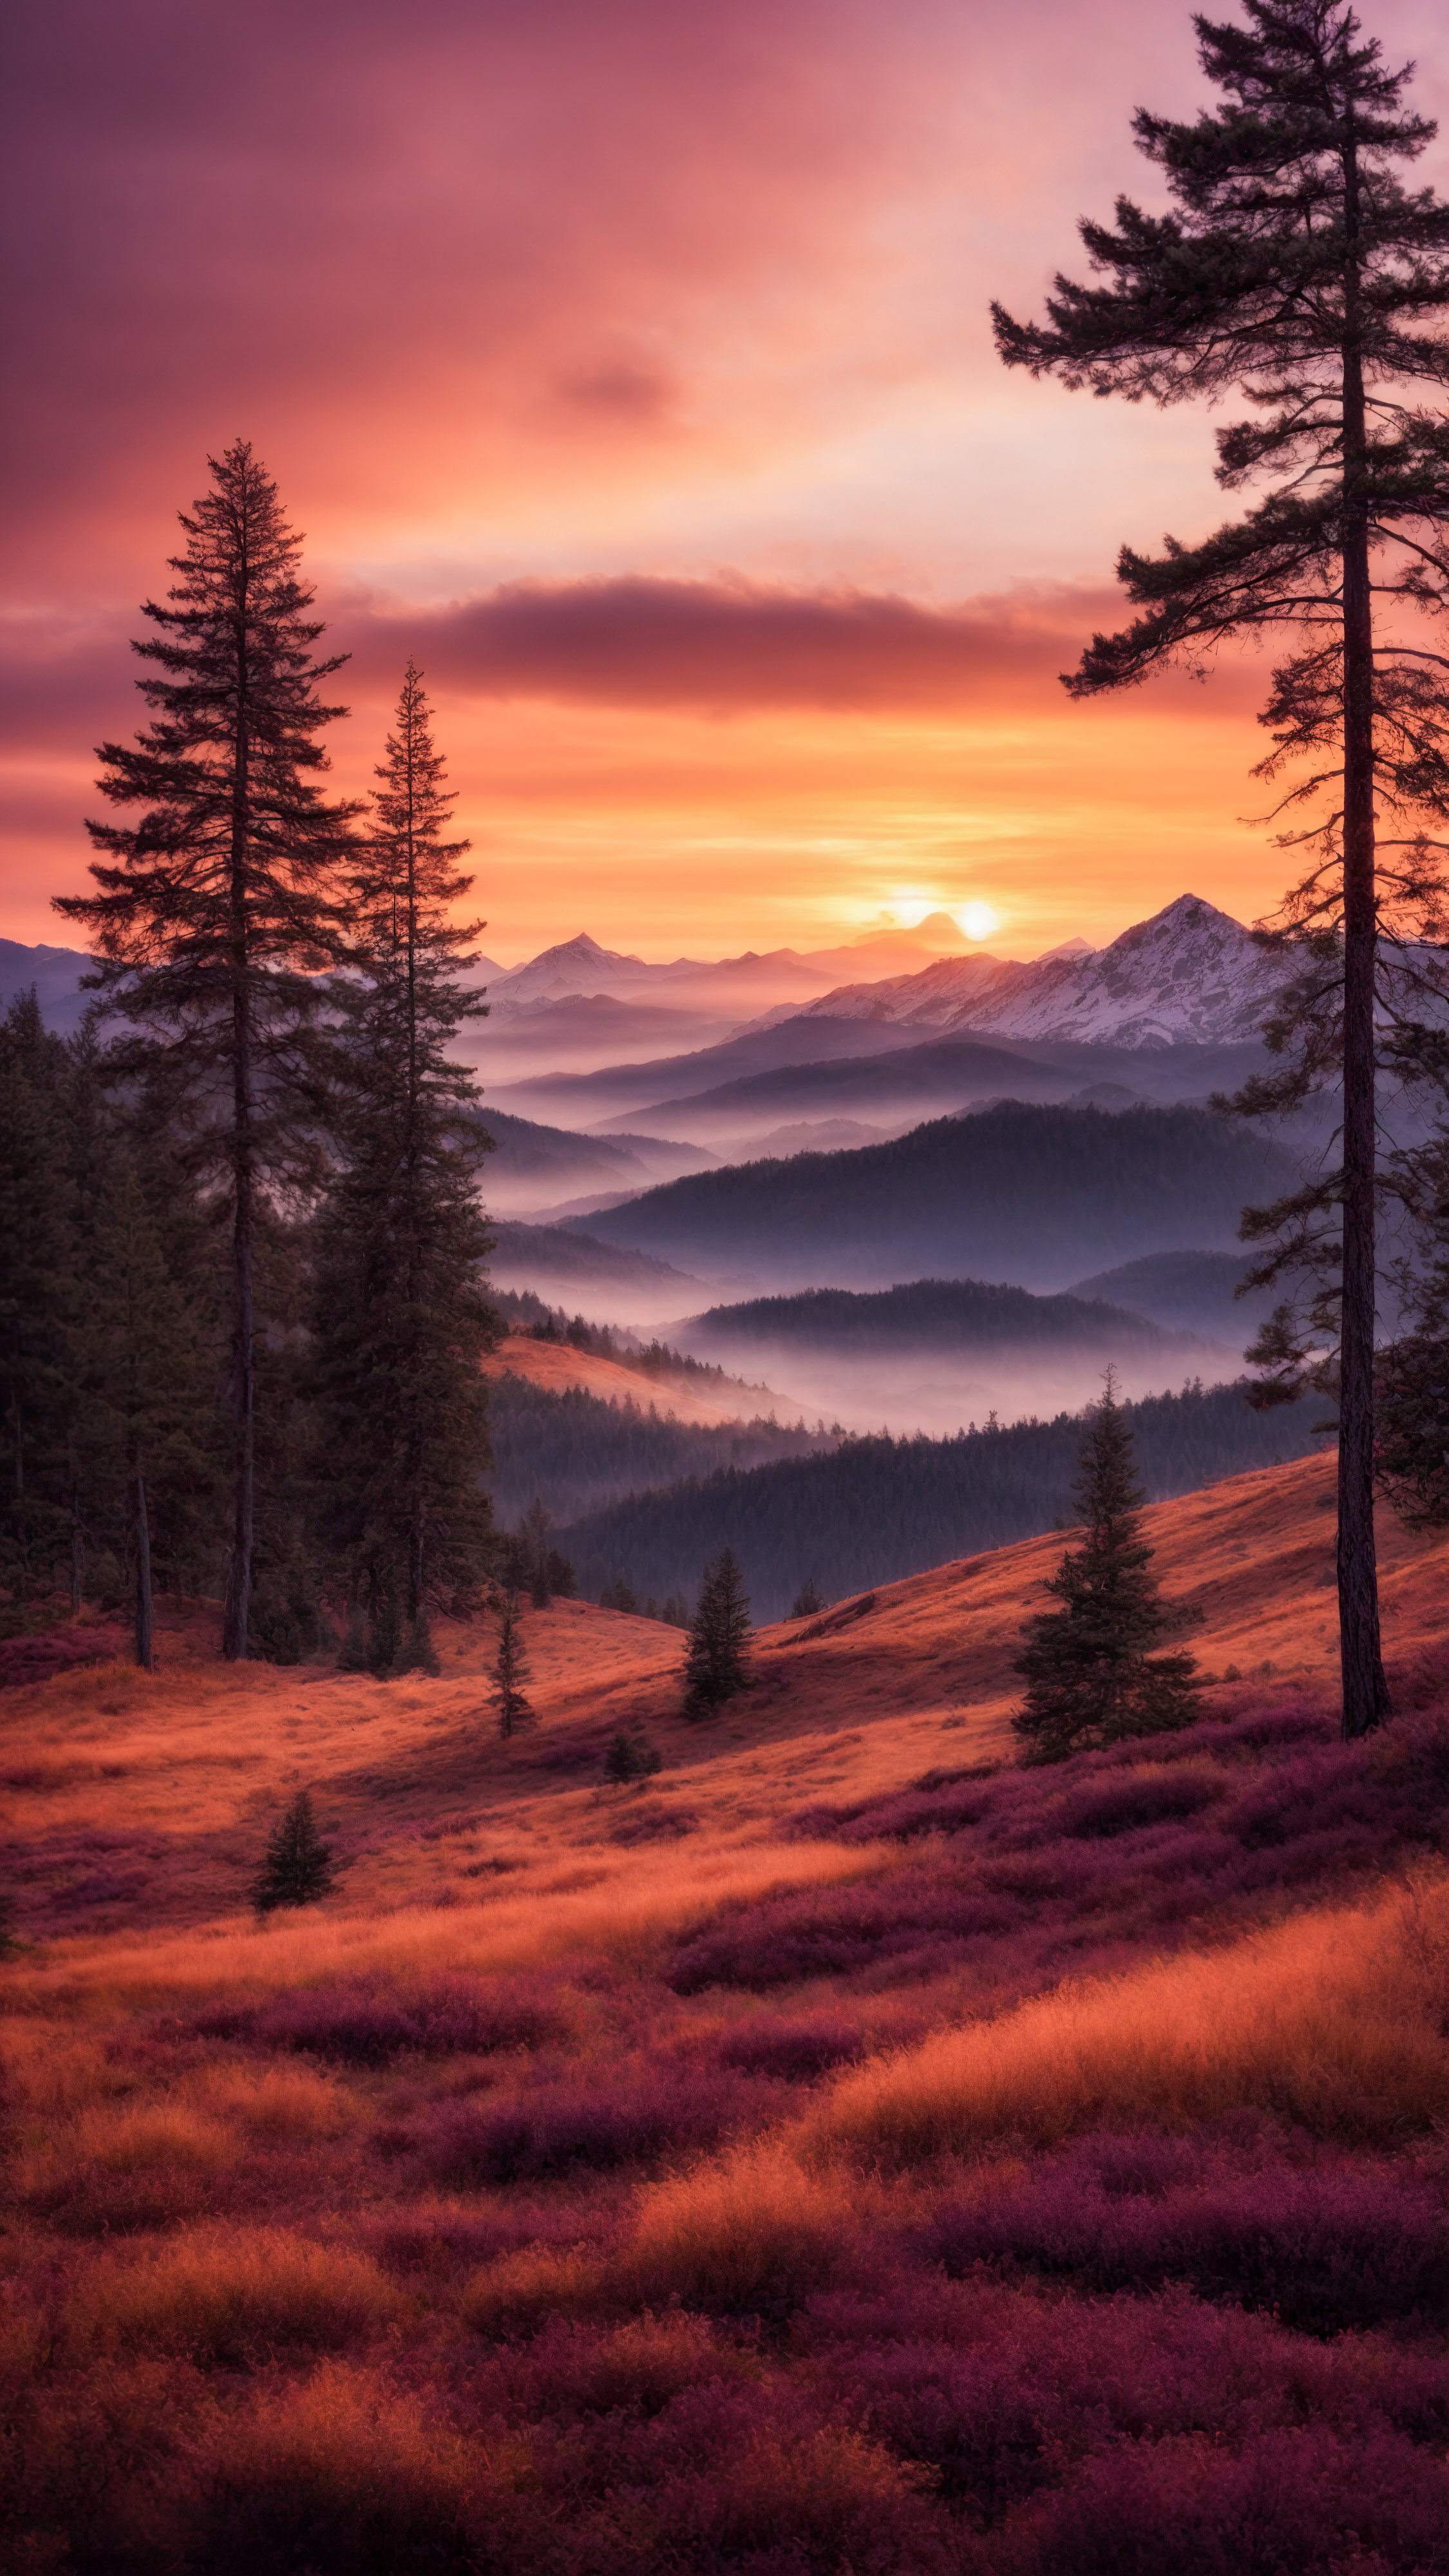 Admire the elegance of a sunset over the mountains, with orange and purple clouds and a silhouetted pine forest, by downloading this iPhone wallpaper.